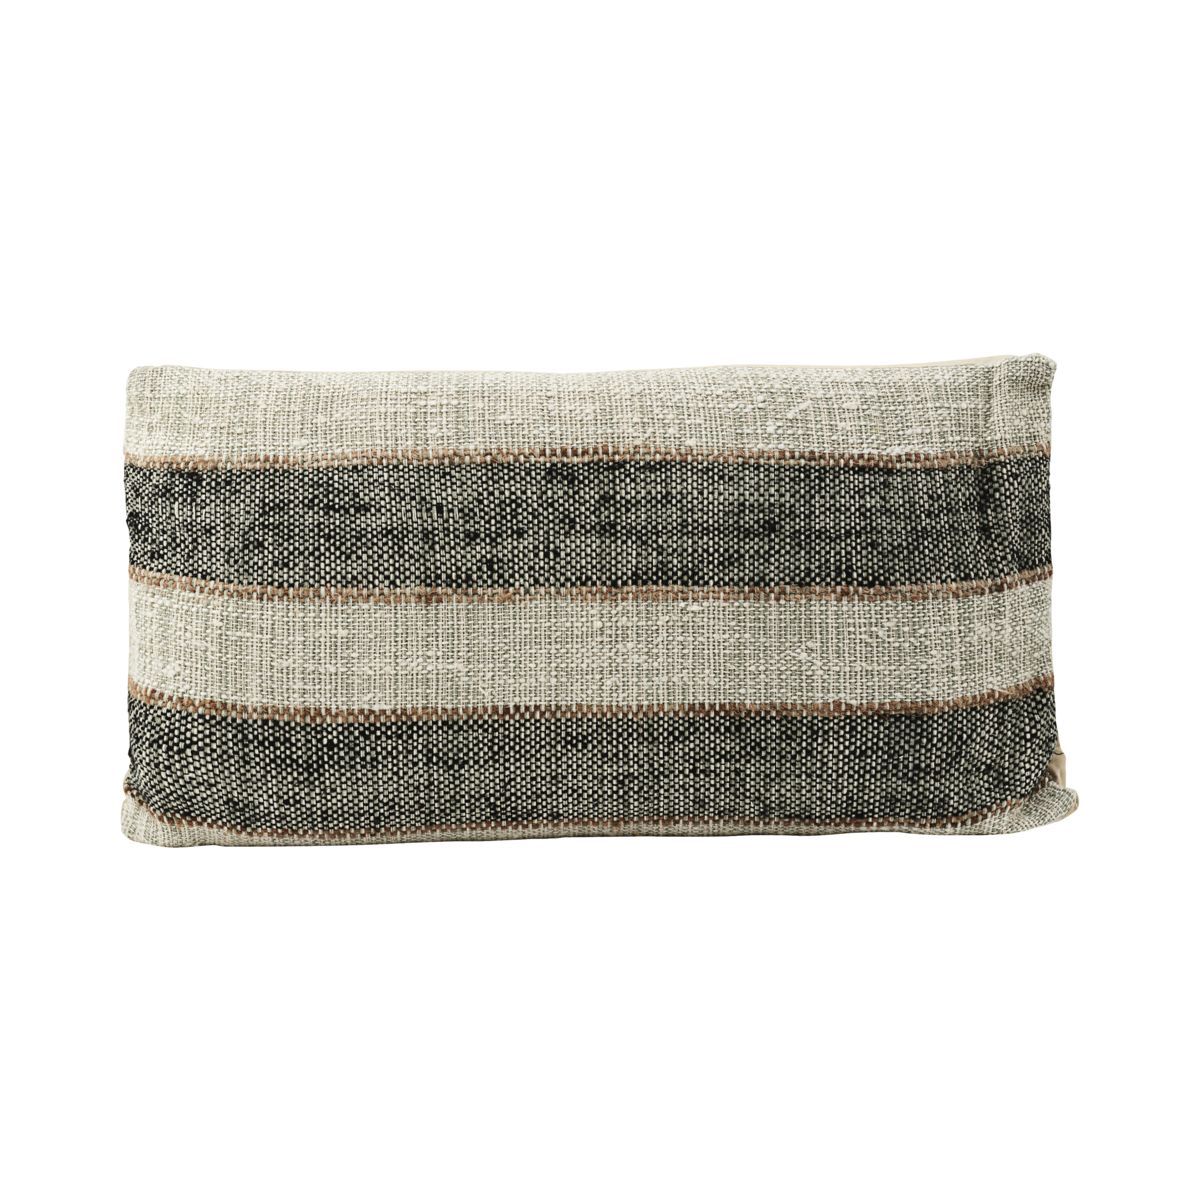 House Doctor Cushion Cover 40x75cm in Beige/Black and Terracotta Striped Cotton/Viscose